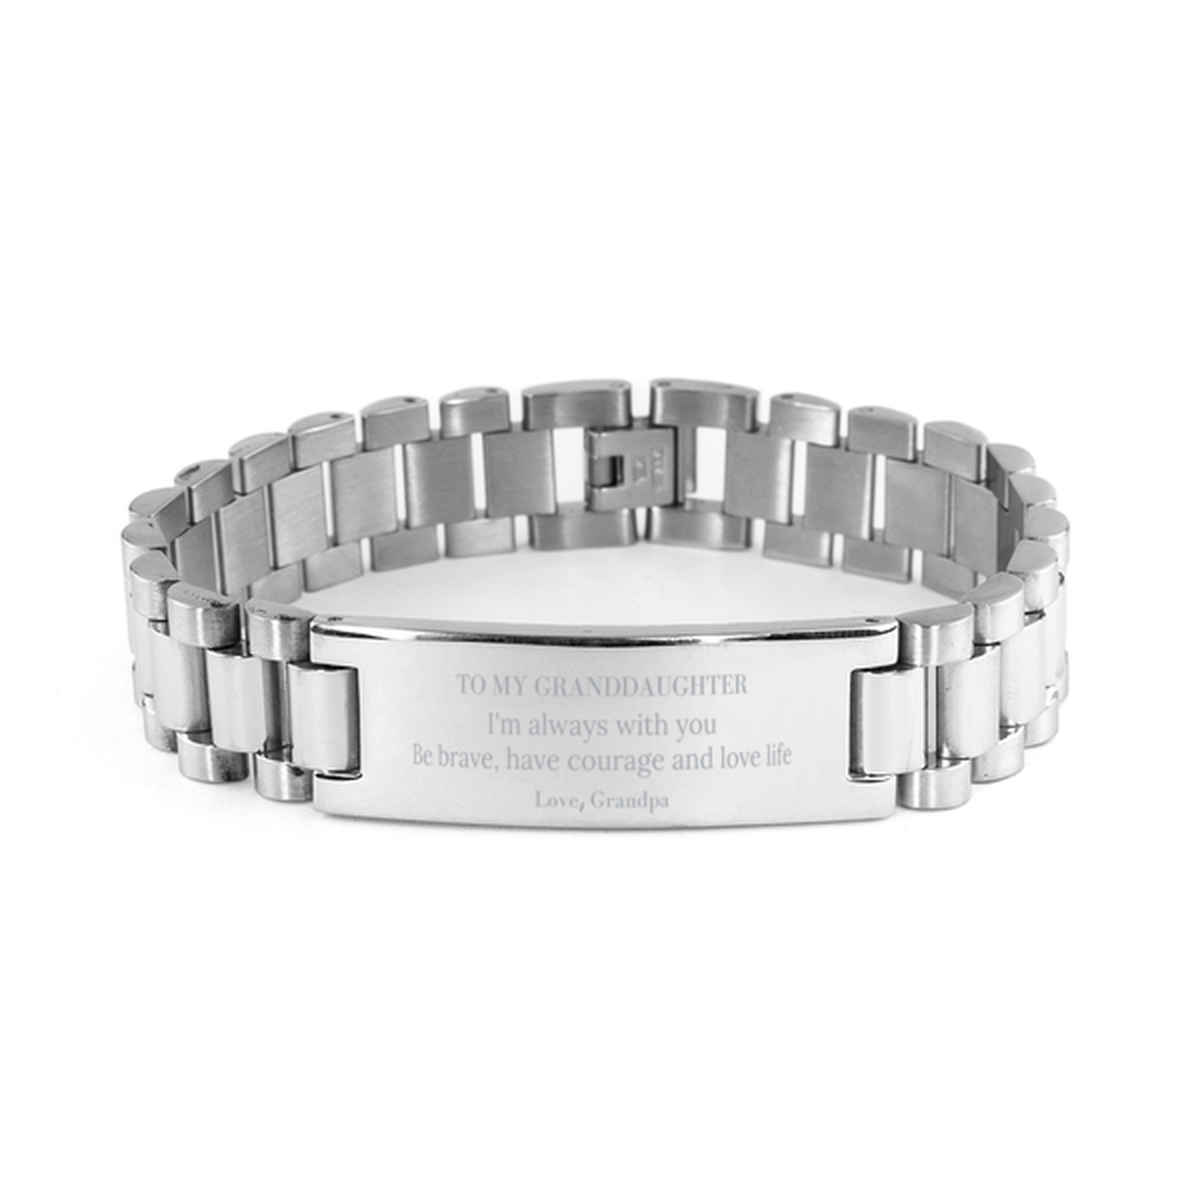 To My Granddaughter Gifts from Grandpa, Unique Ladder Stainless Steel Bracelet Inspirational Christmas Birthday Graduation Gifts for Granddaughter I'm always with you. Be brave, have courage and love life. Love, Grandpa